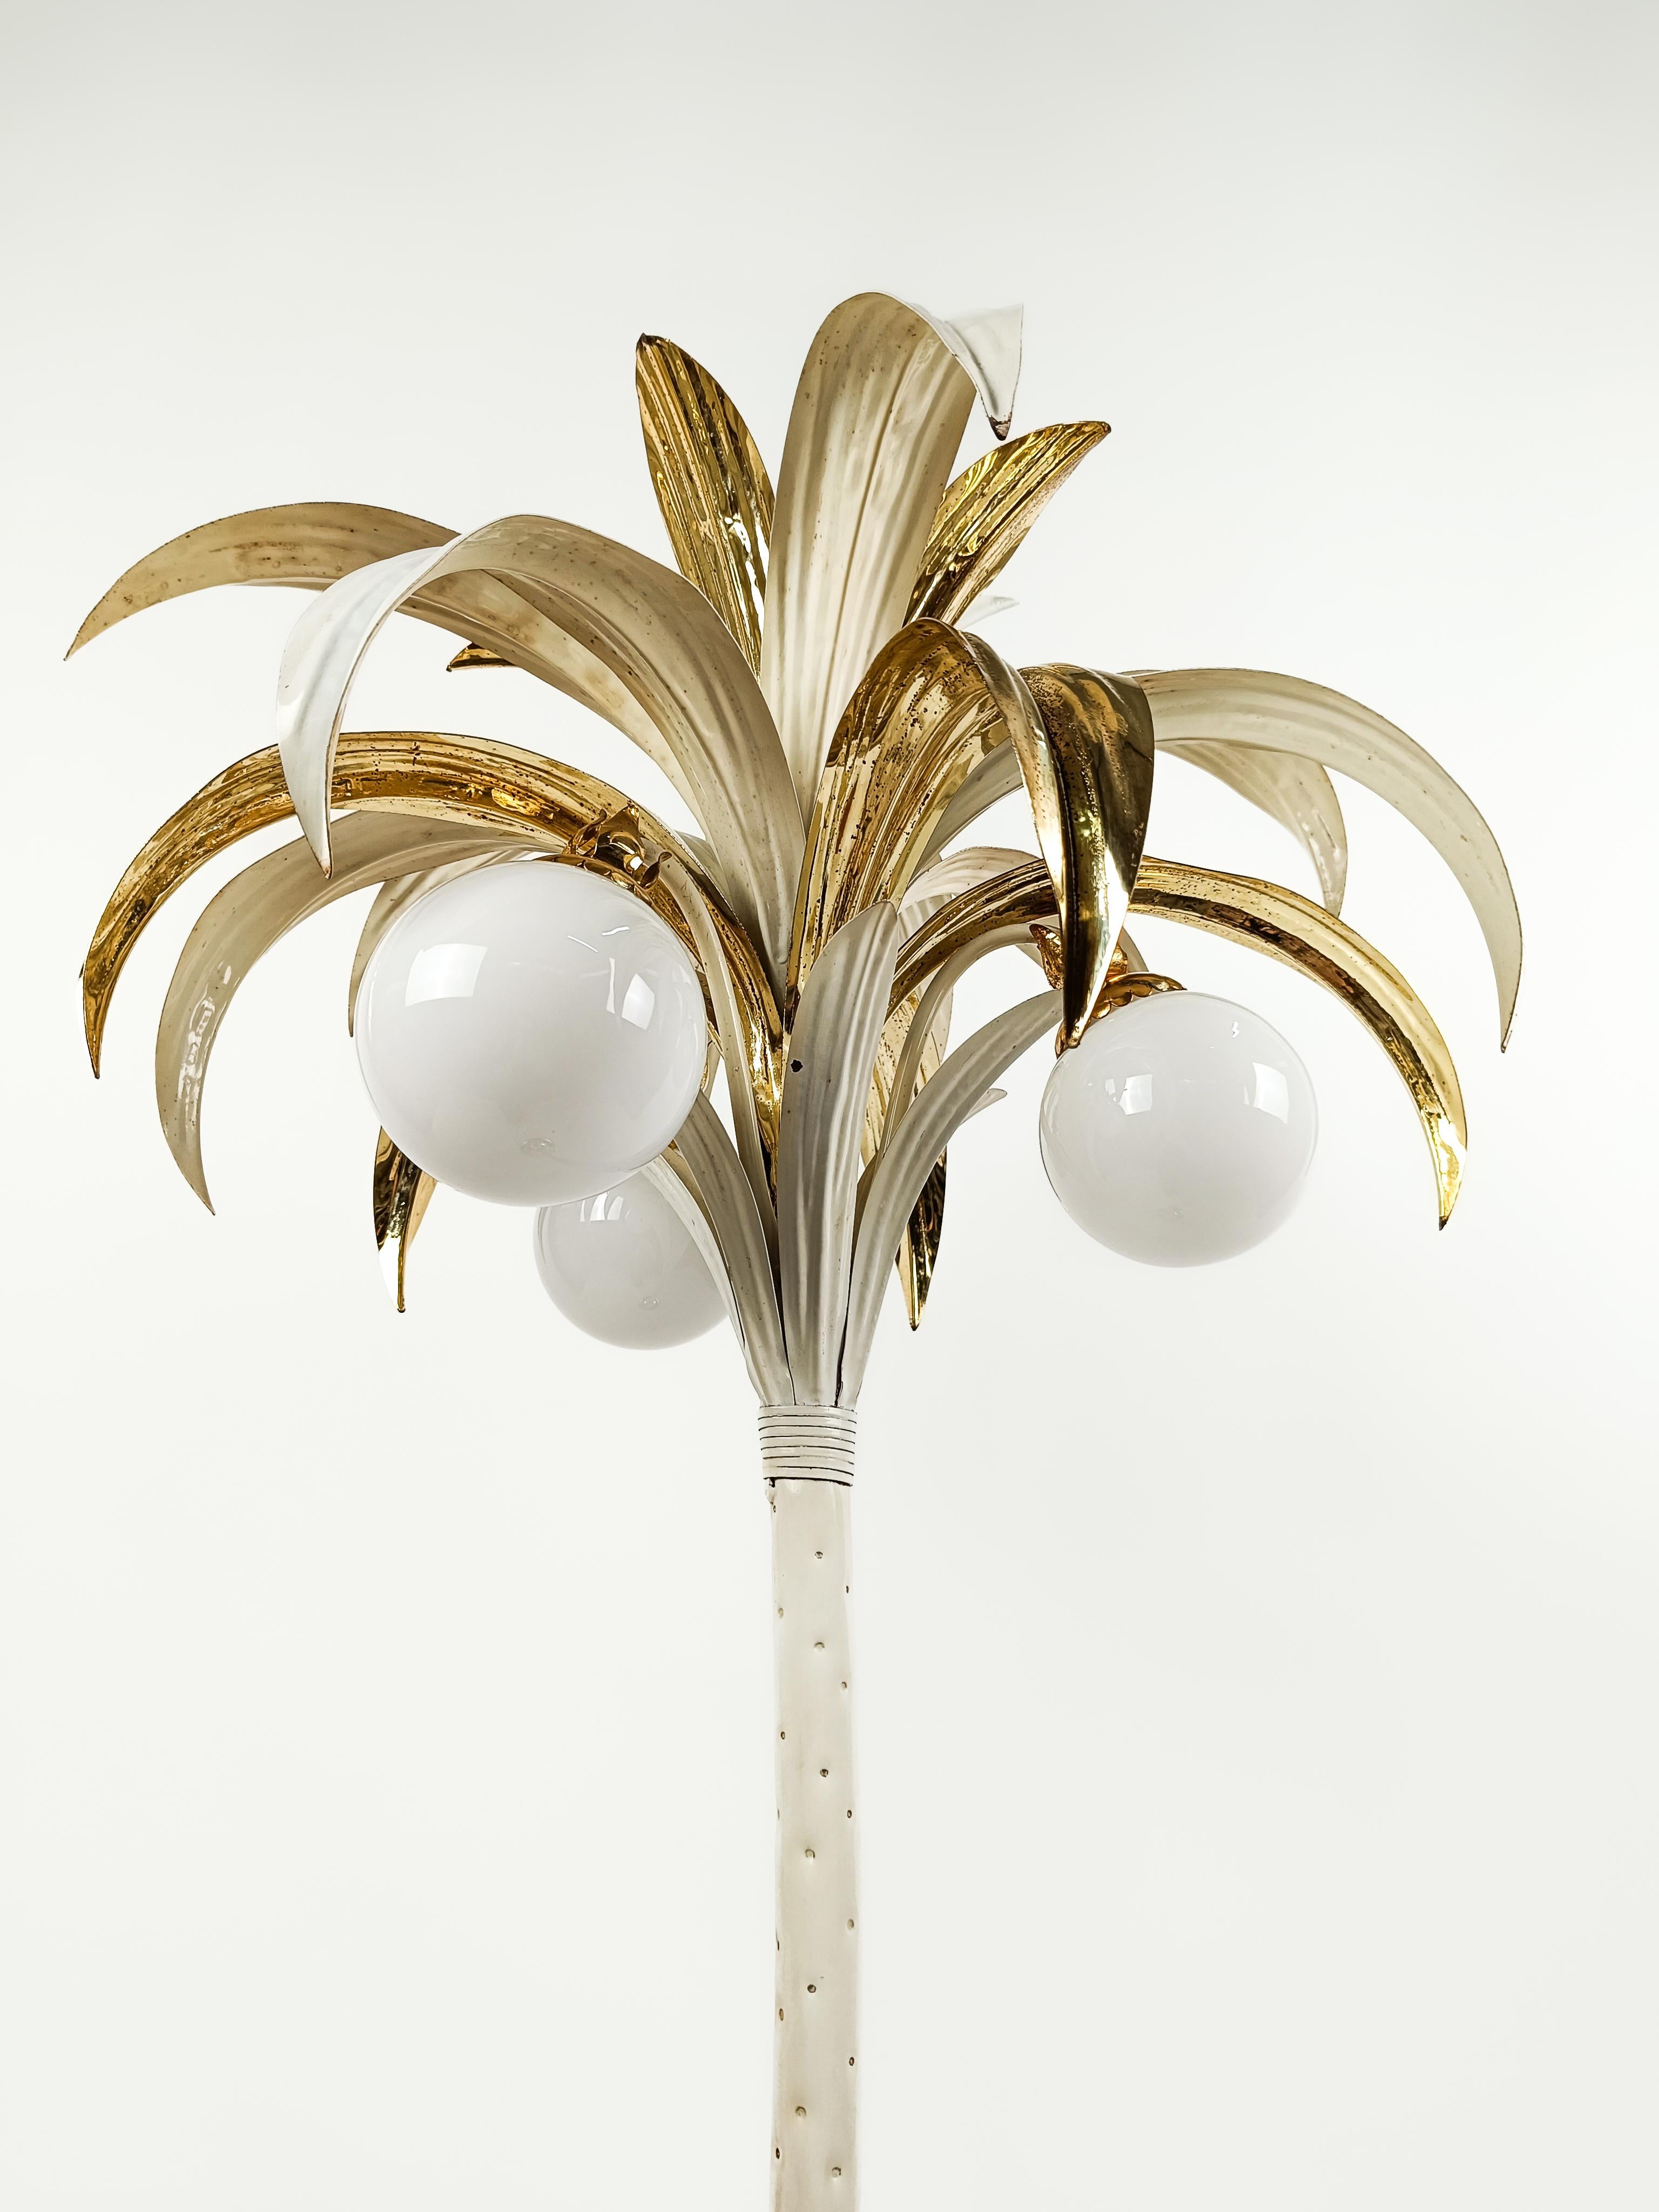 Splendid Floor Lamp produced between the 1960s and 1970s in Italy in the style of Hans Kogl.

The palm tree shape of this vintage plant is one of the naturalistic themes most used by Hans Kogl, who also reproduced it for the Maison Jansen